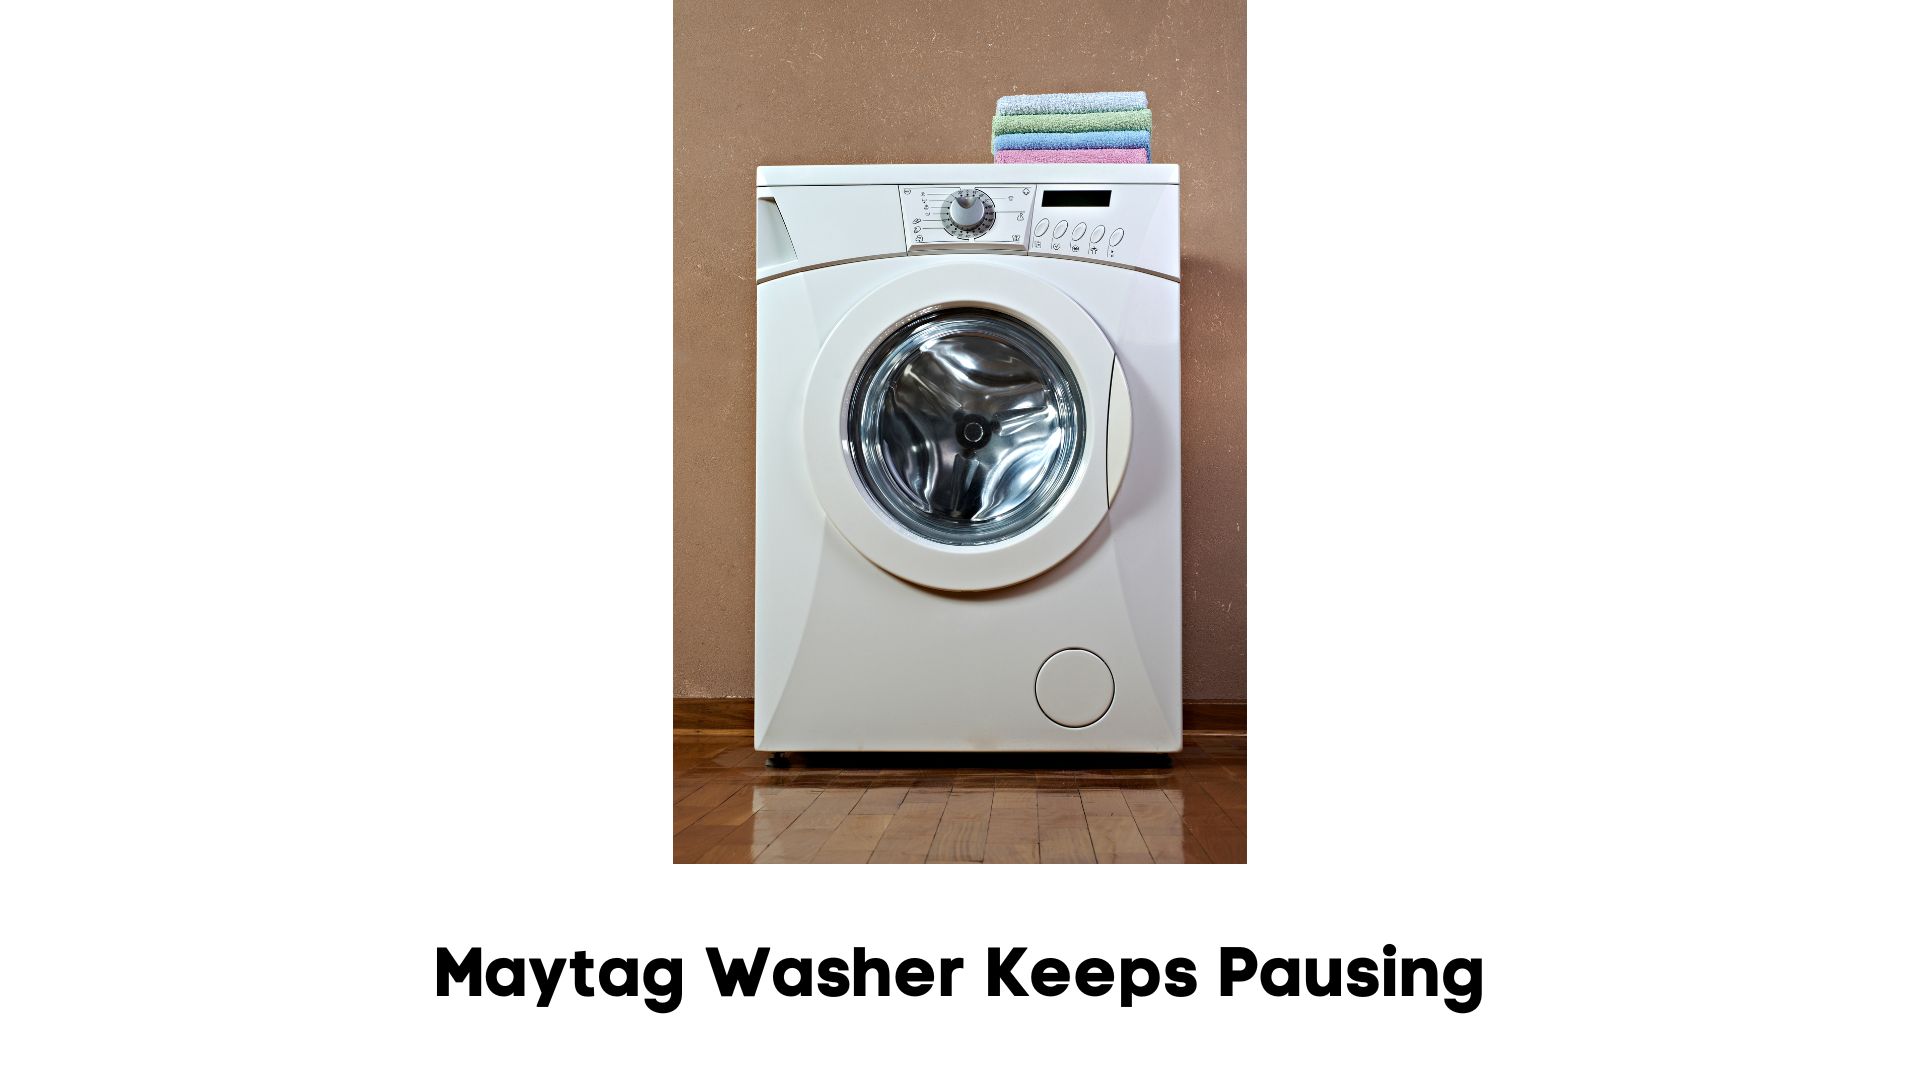 maytag washer keeps pausing mid cycle, spin cycle and wash cycle